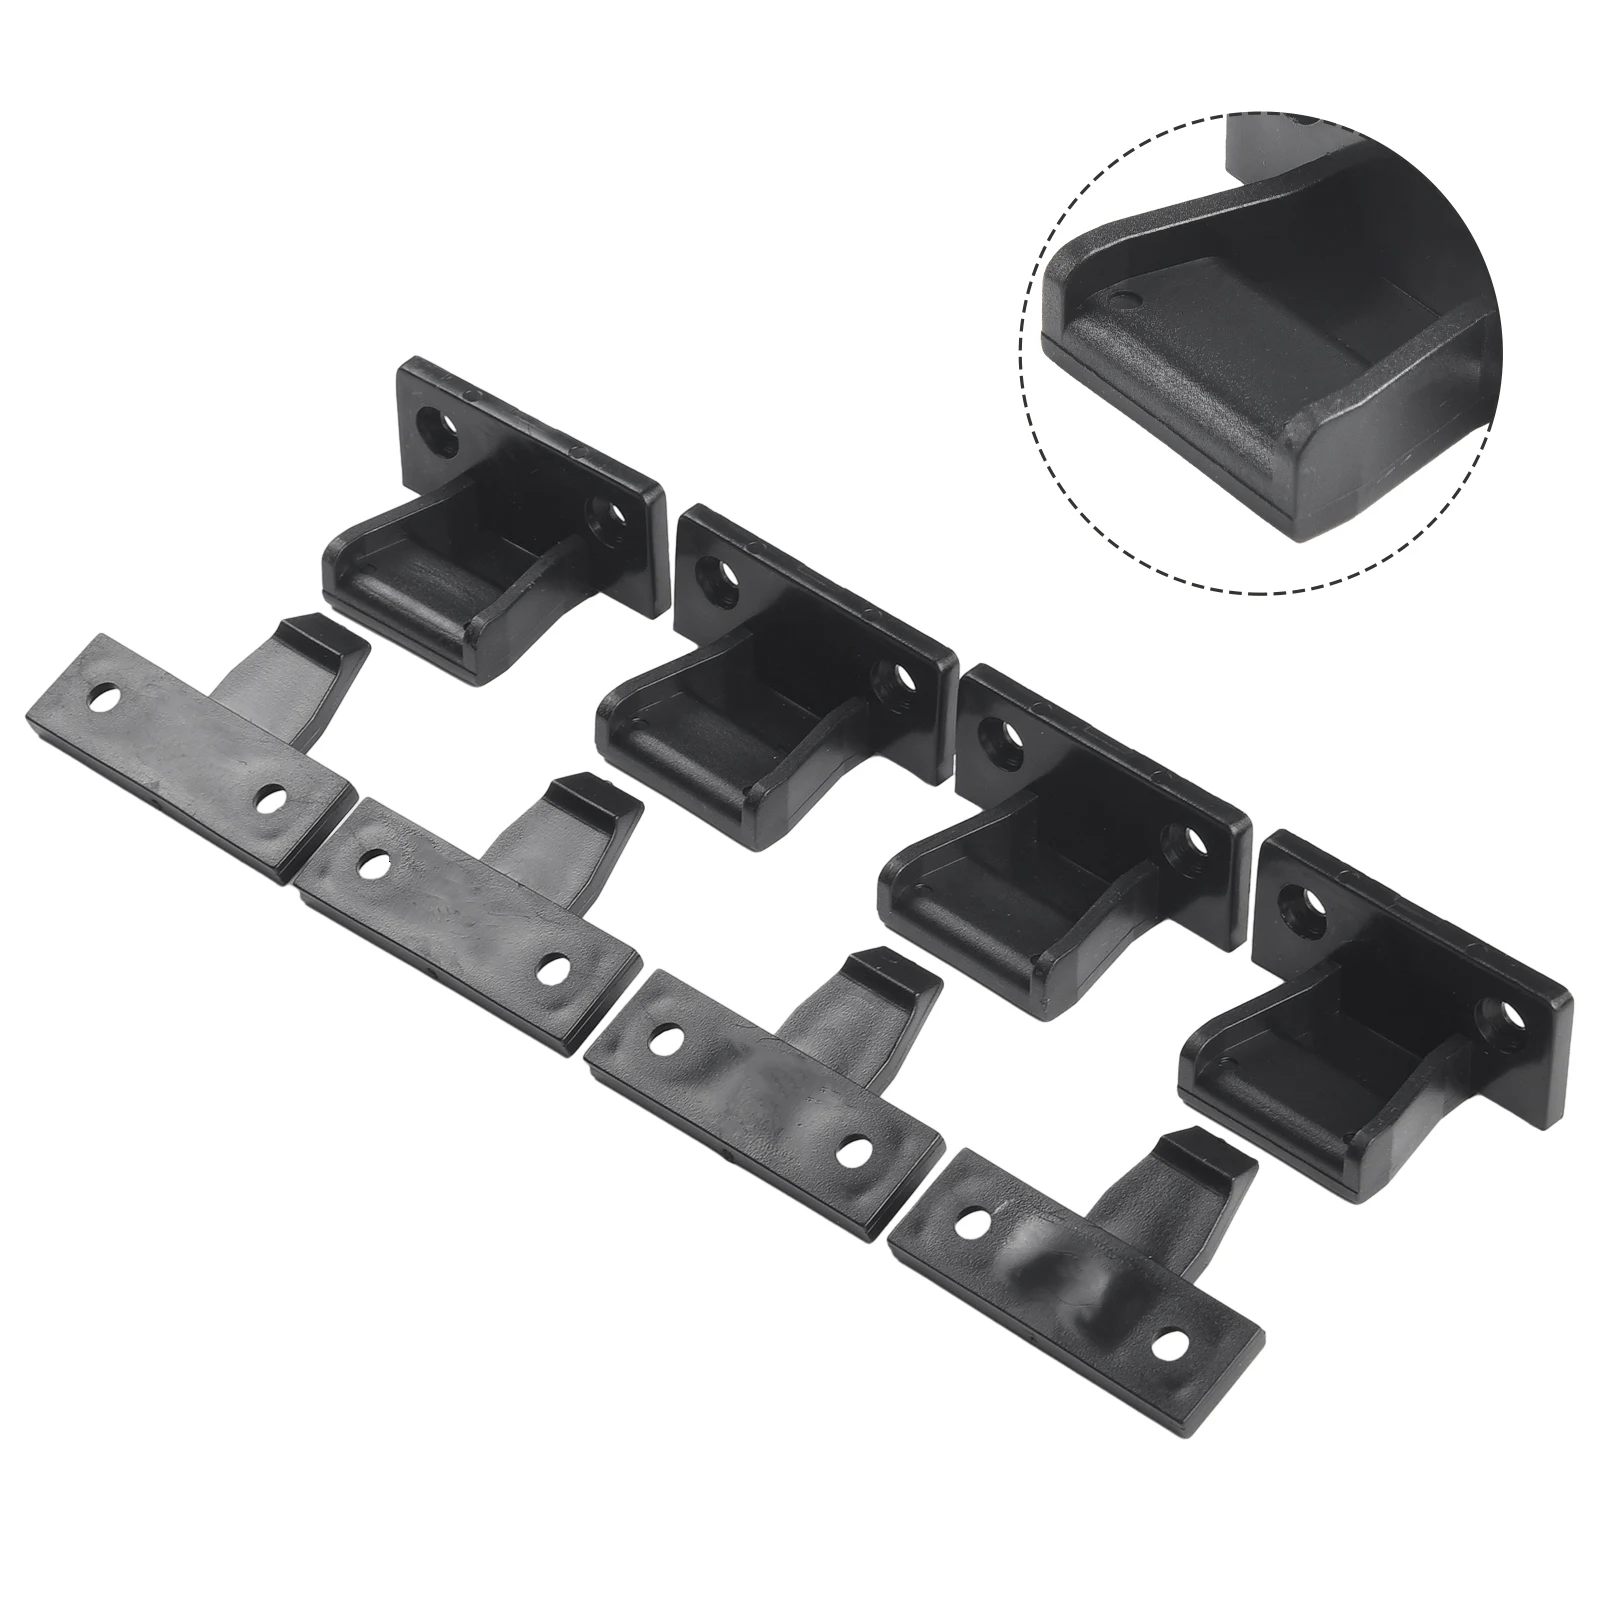 Buckle Bracket Home Tool Parts Kitchen Accessories Cabinets Home Improvement Countertops Hardware 4 Pcs Brand New